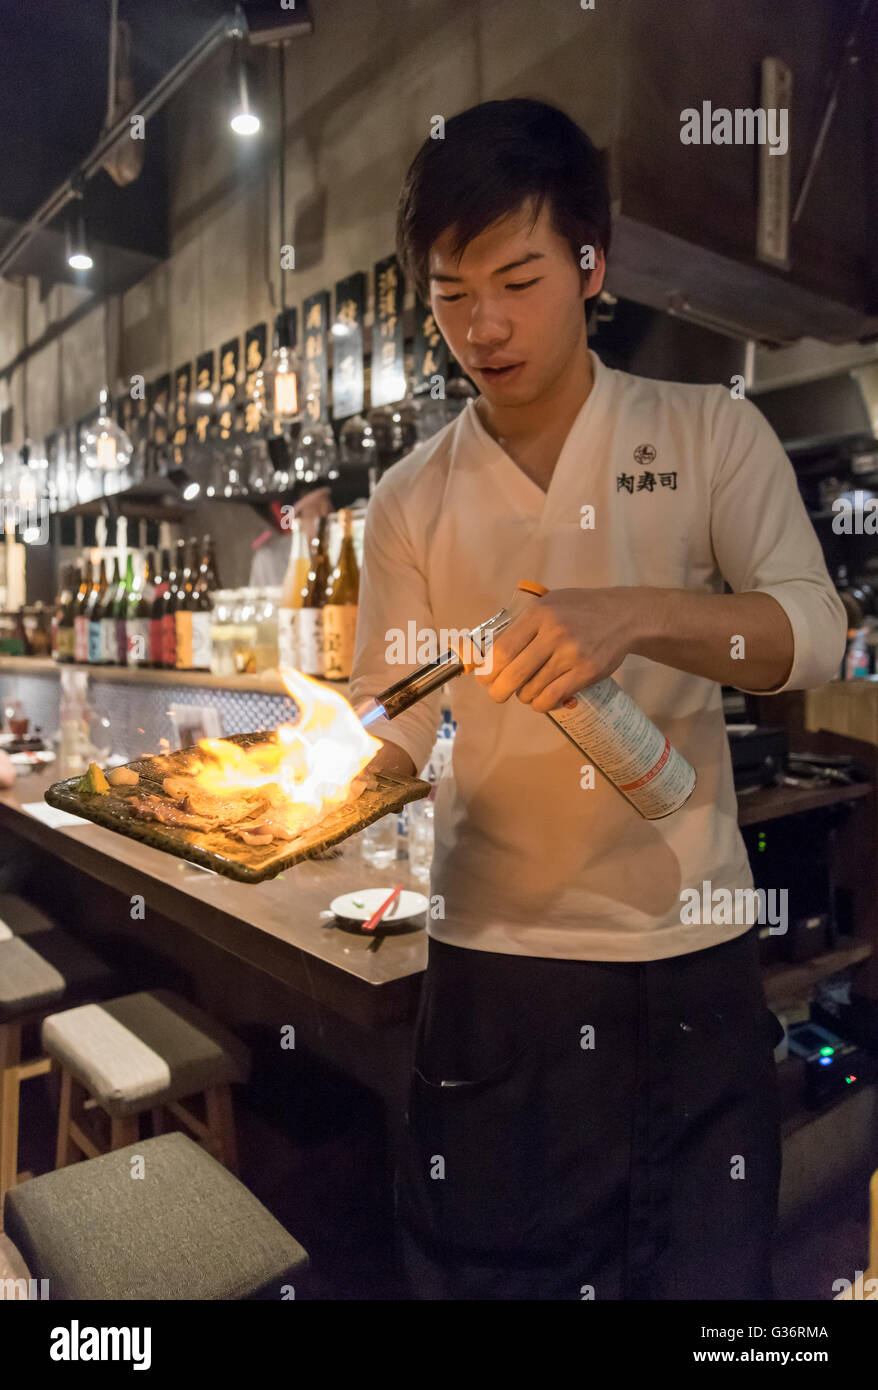 https://c8.alamy.com/comp/G36RMA/waiter-cooks-fresh-meat-with-a-blow-torch-in-a-restaurant-in-kabukicho-G36RMA.jpg